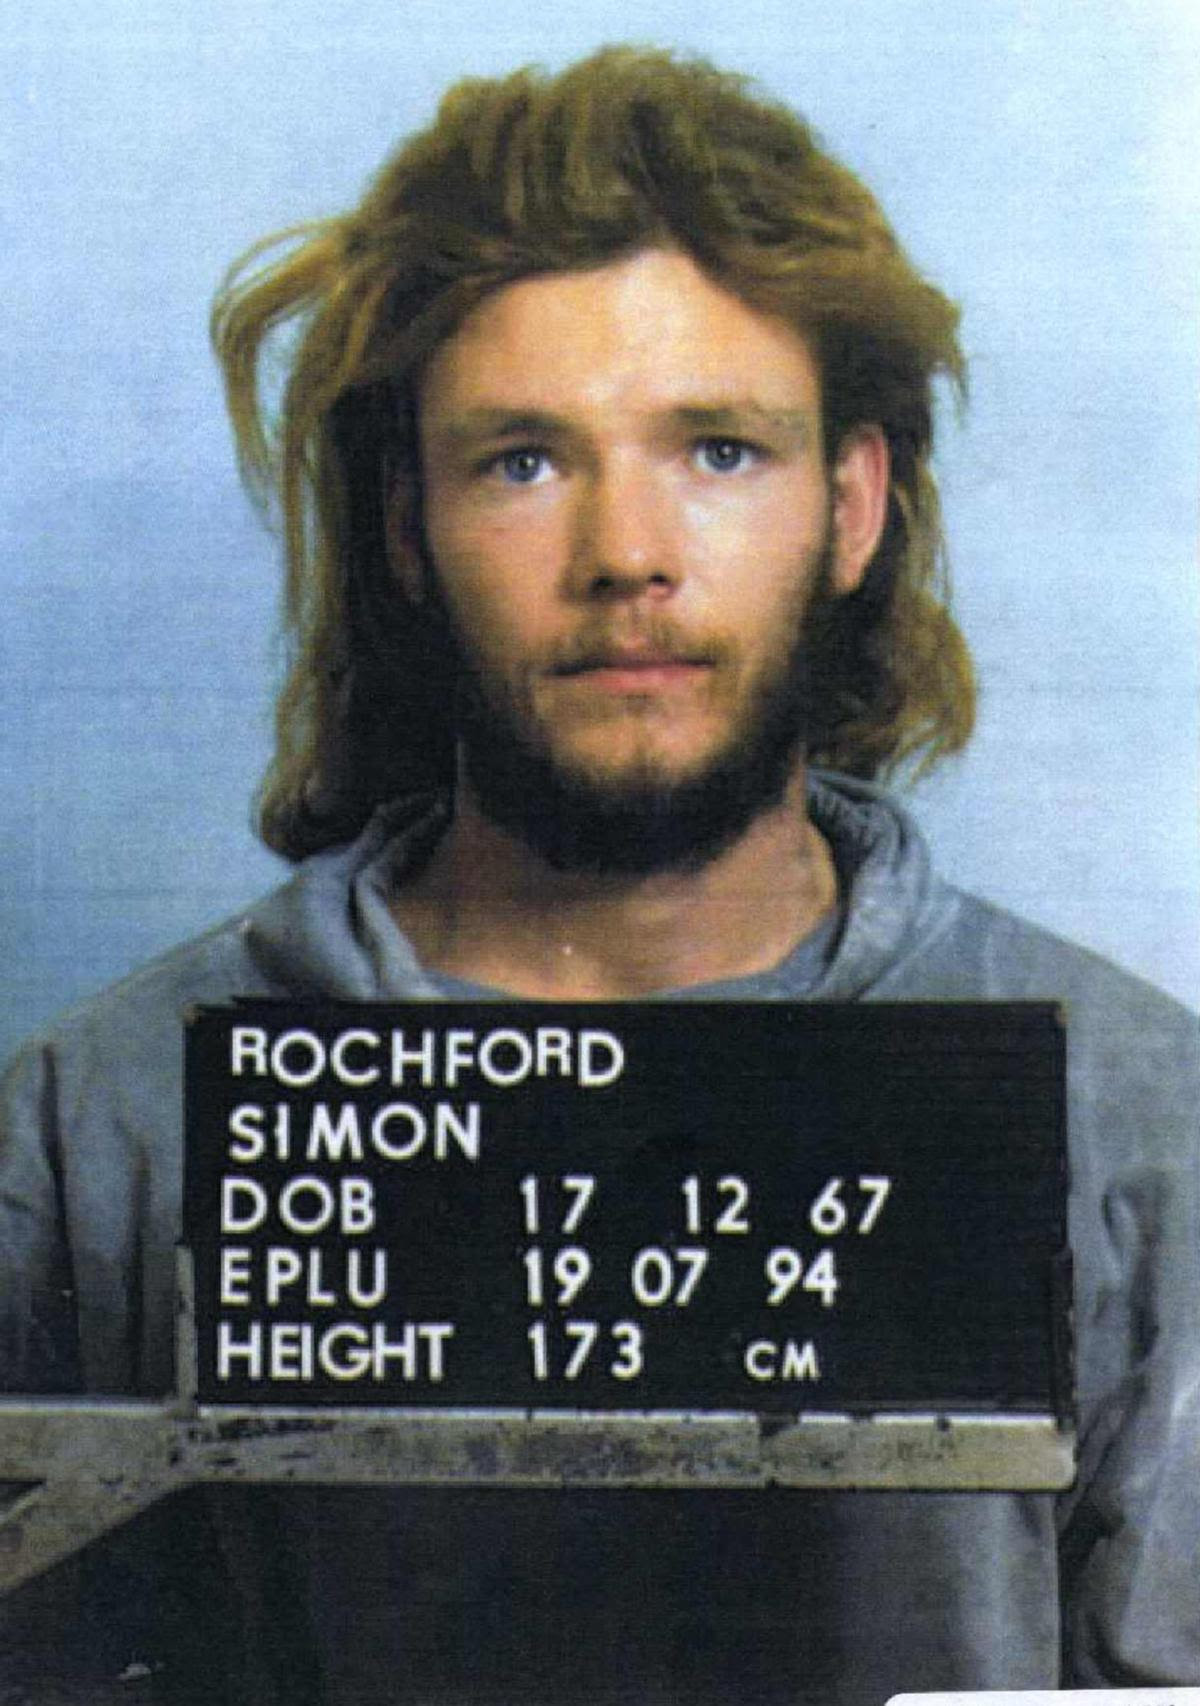 Murderer Simon Rochford killed himself in Albany Regional Prison a day after he was questioned about the murder of Pamela Lawrence in 1994.